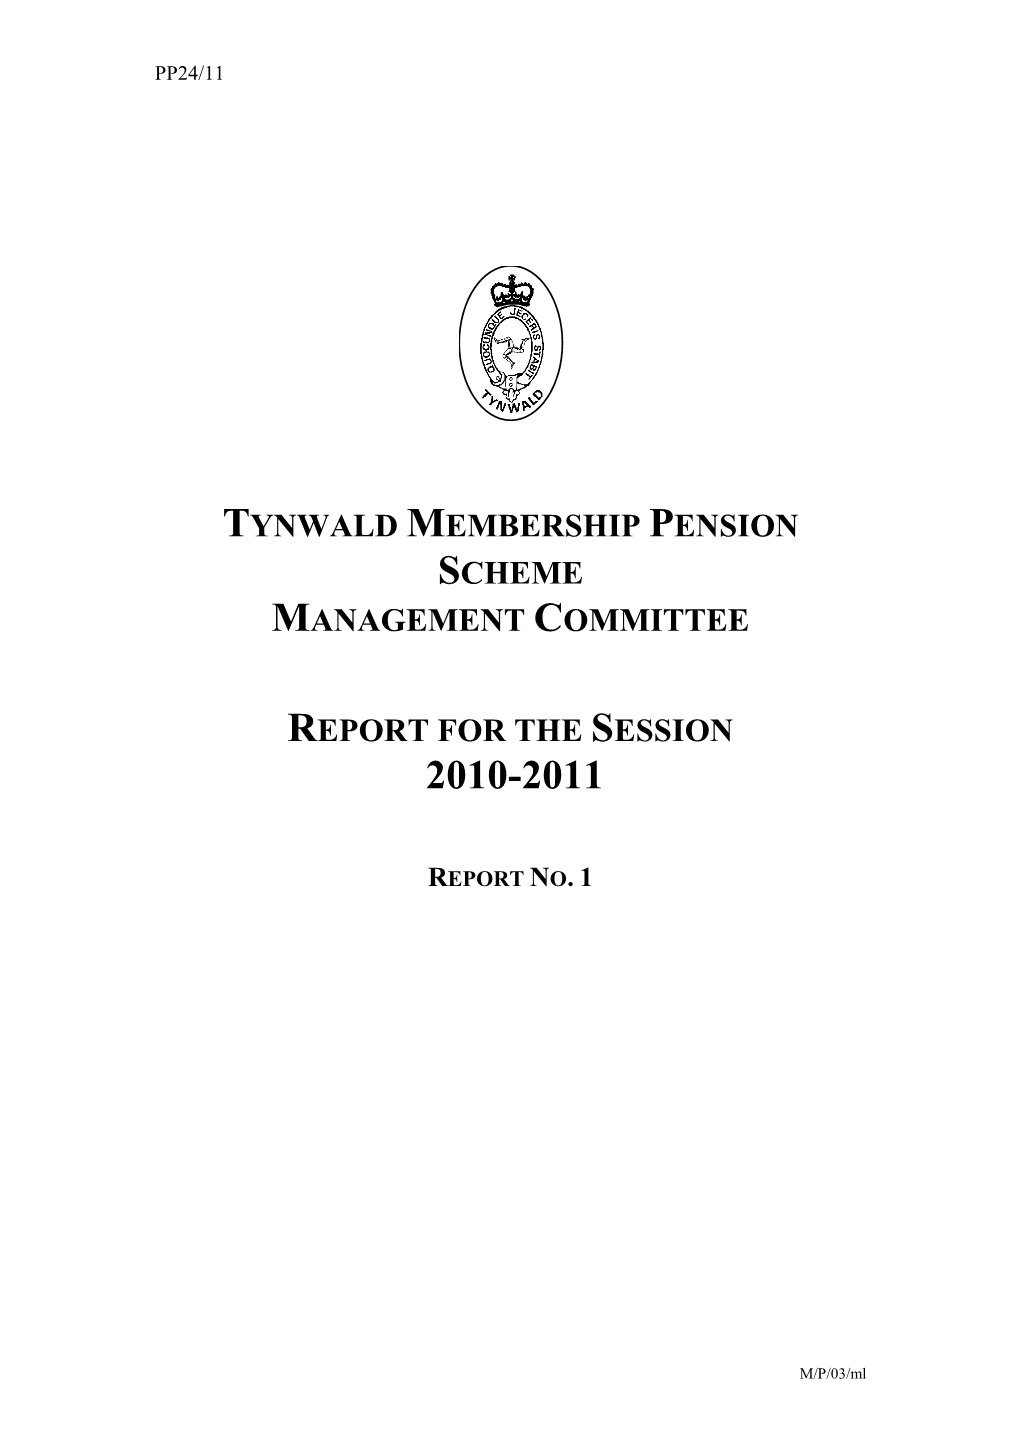 Tynwald Membership Pension Scheme Management Committee Report for the Session